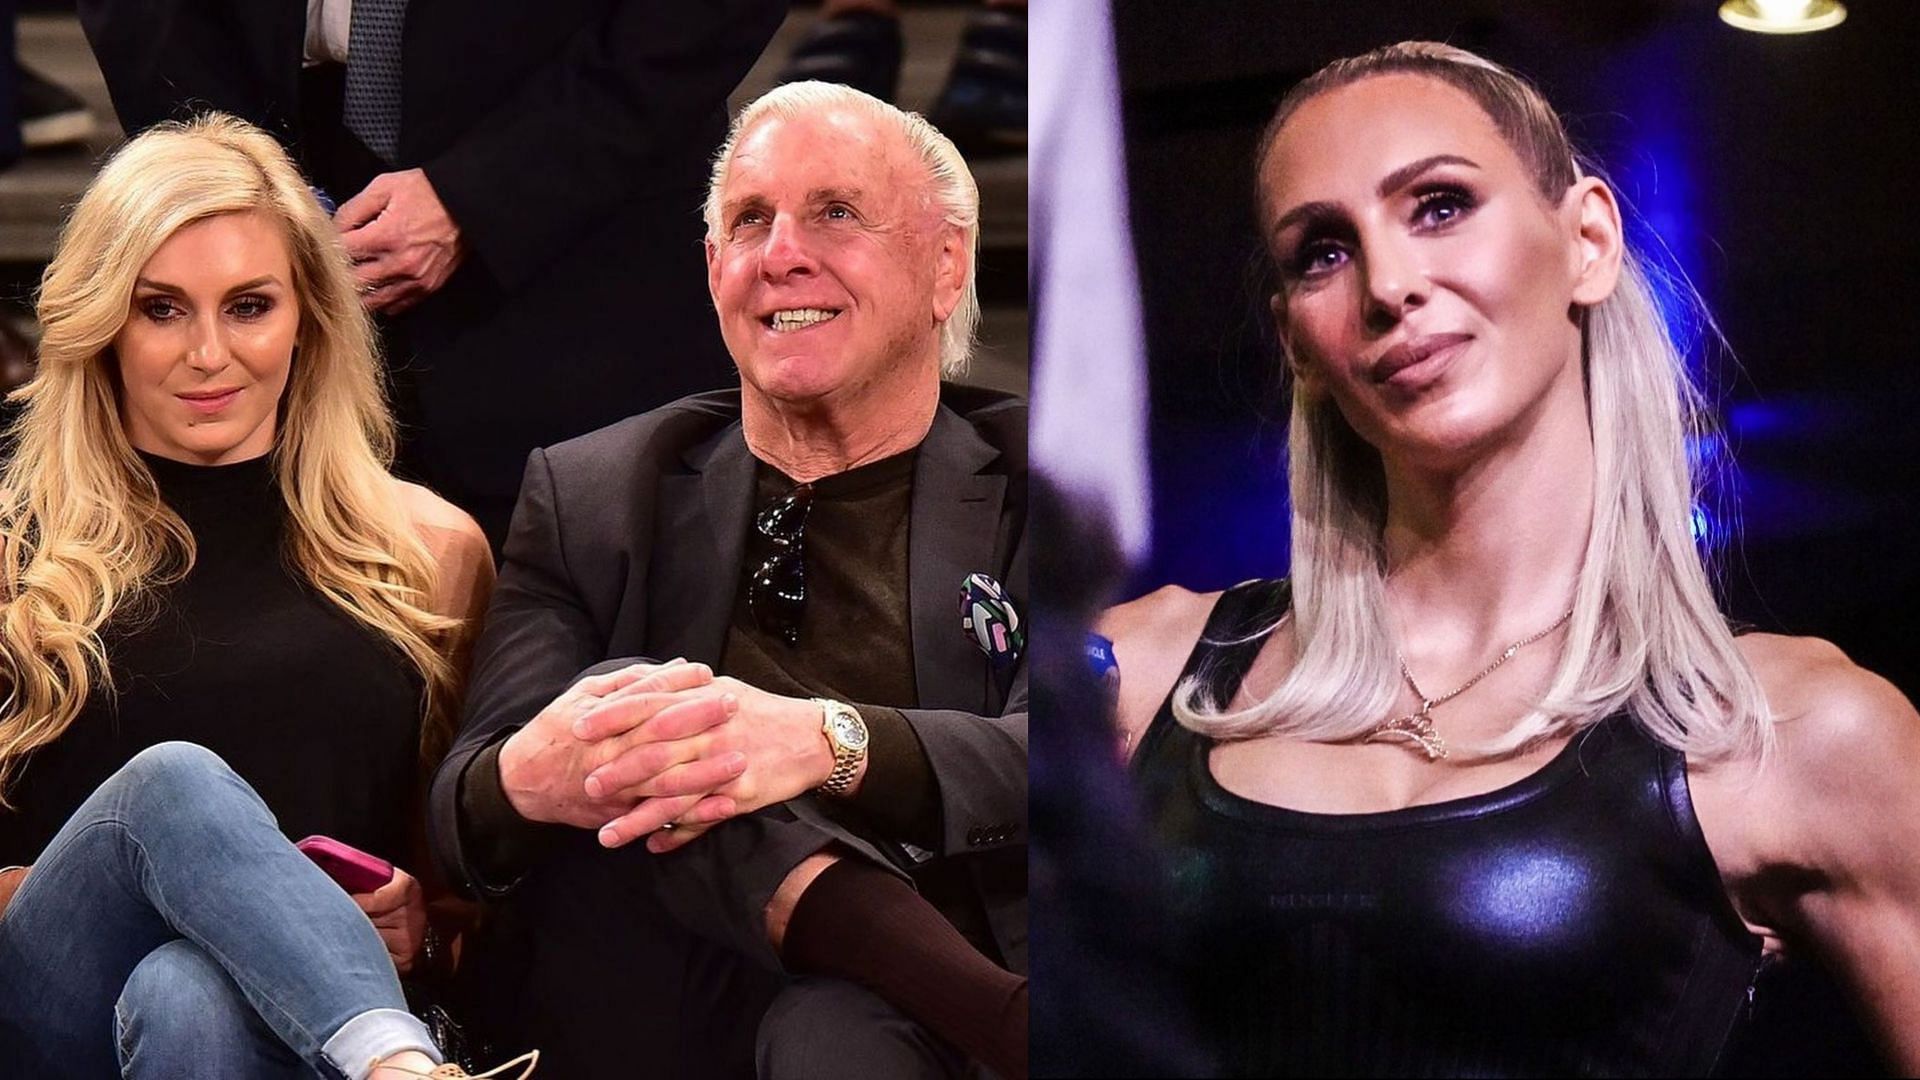 Charlotte Flair with her father, WWE Hall of Famer Ric Flair